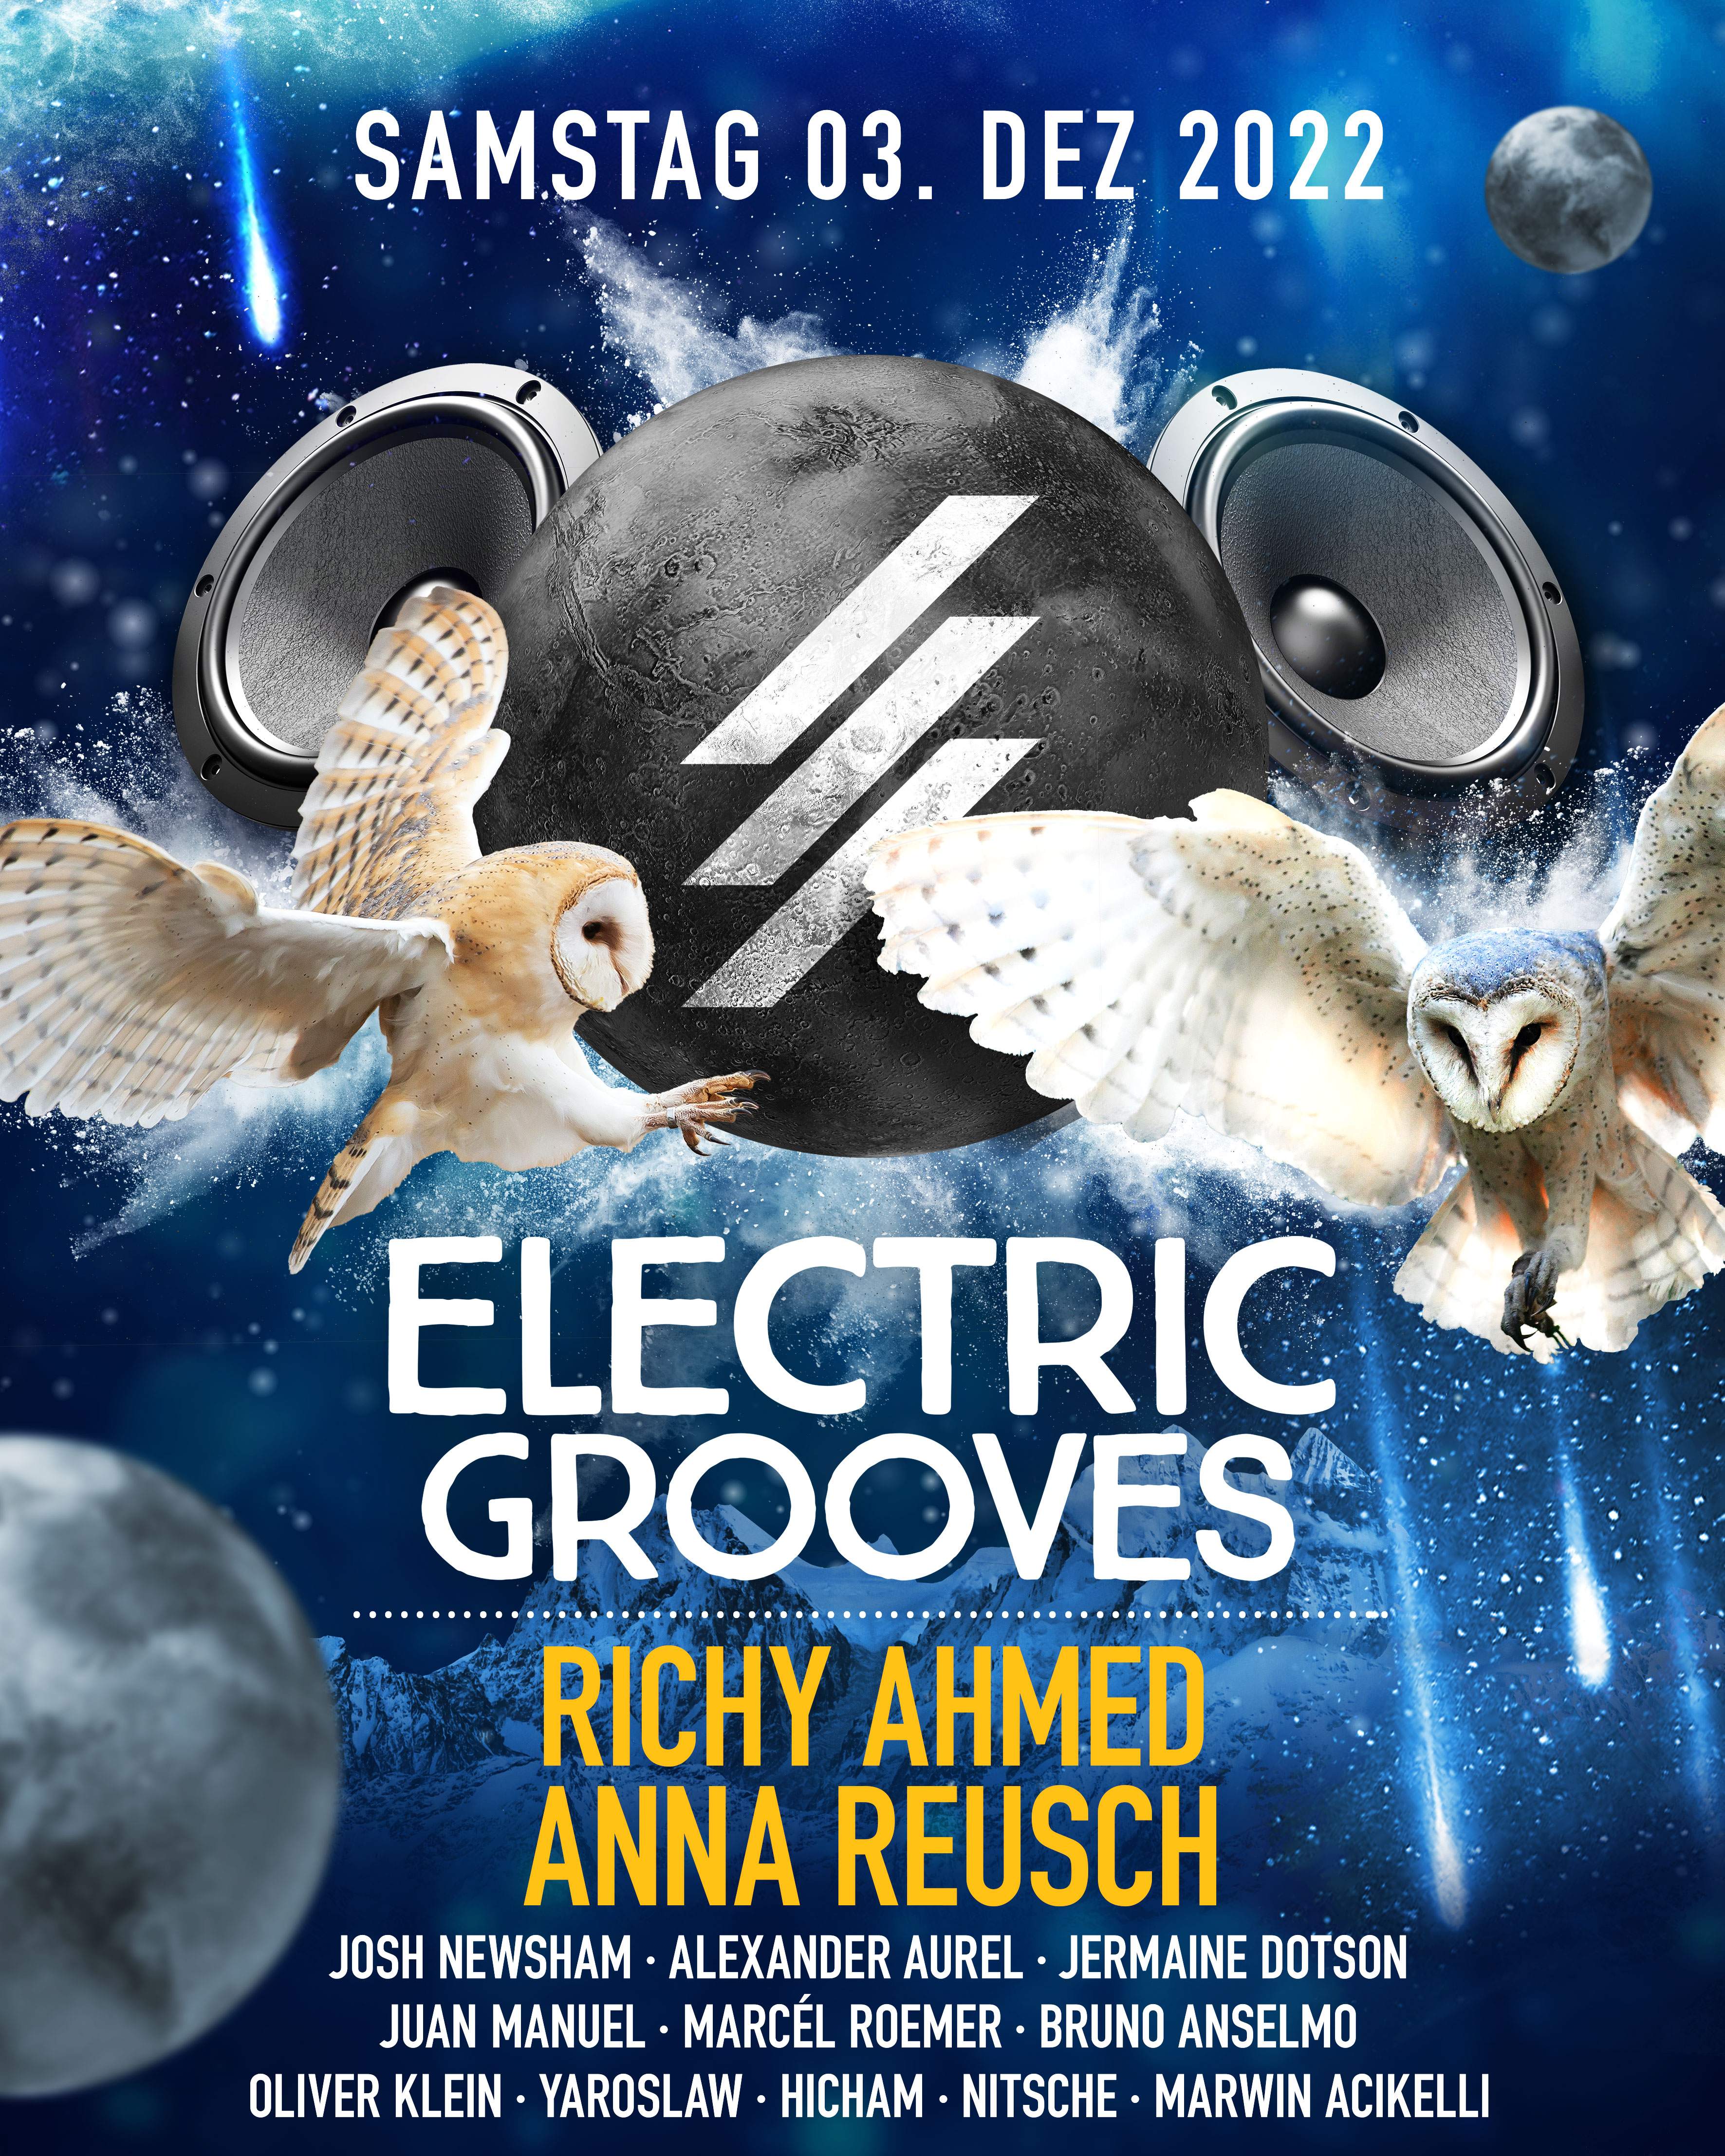 Electric Grooves with Richy Ahmed & Anna Reusch - フライヤー表